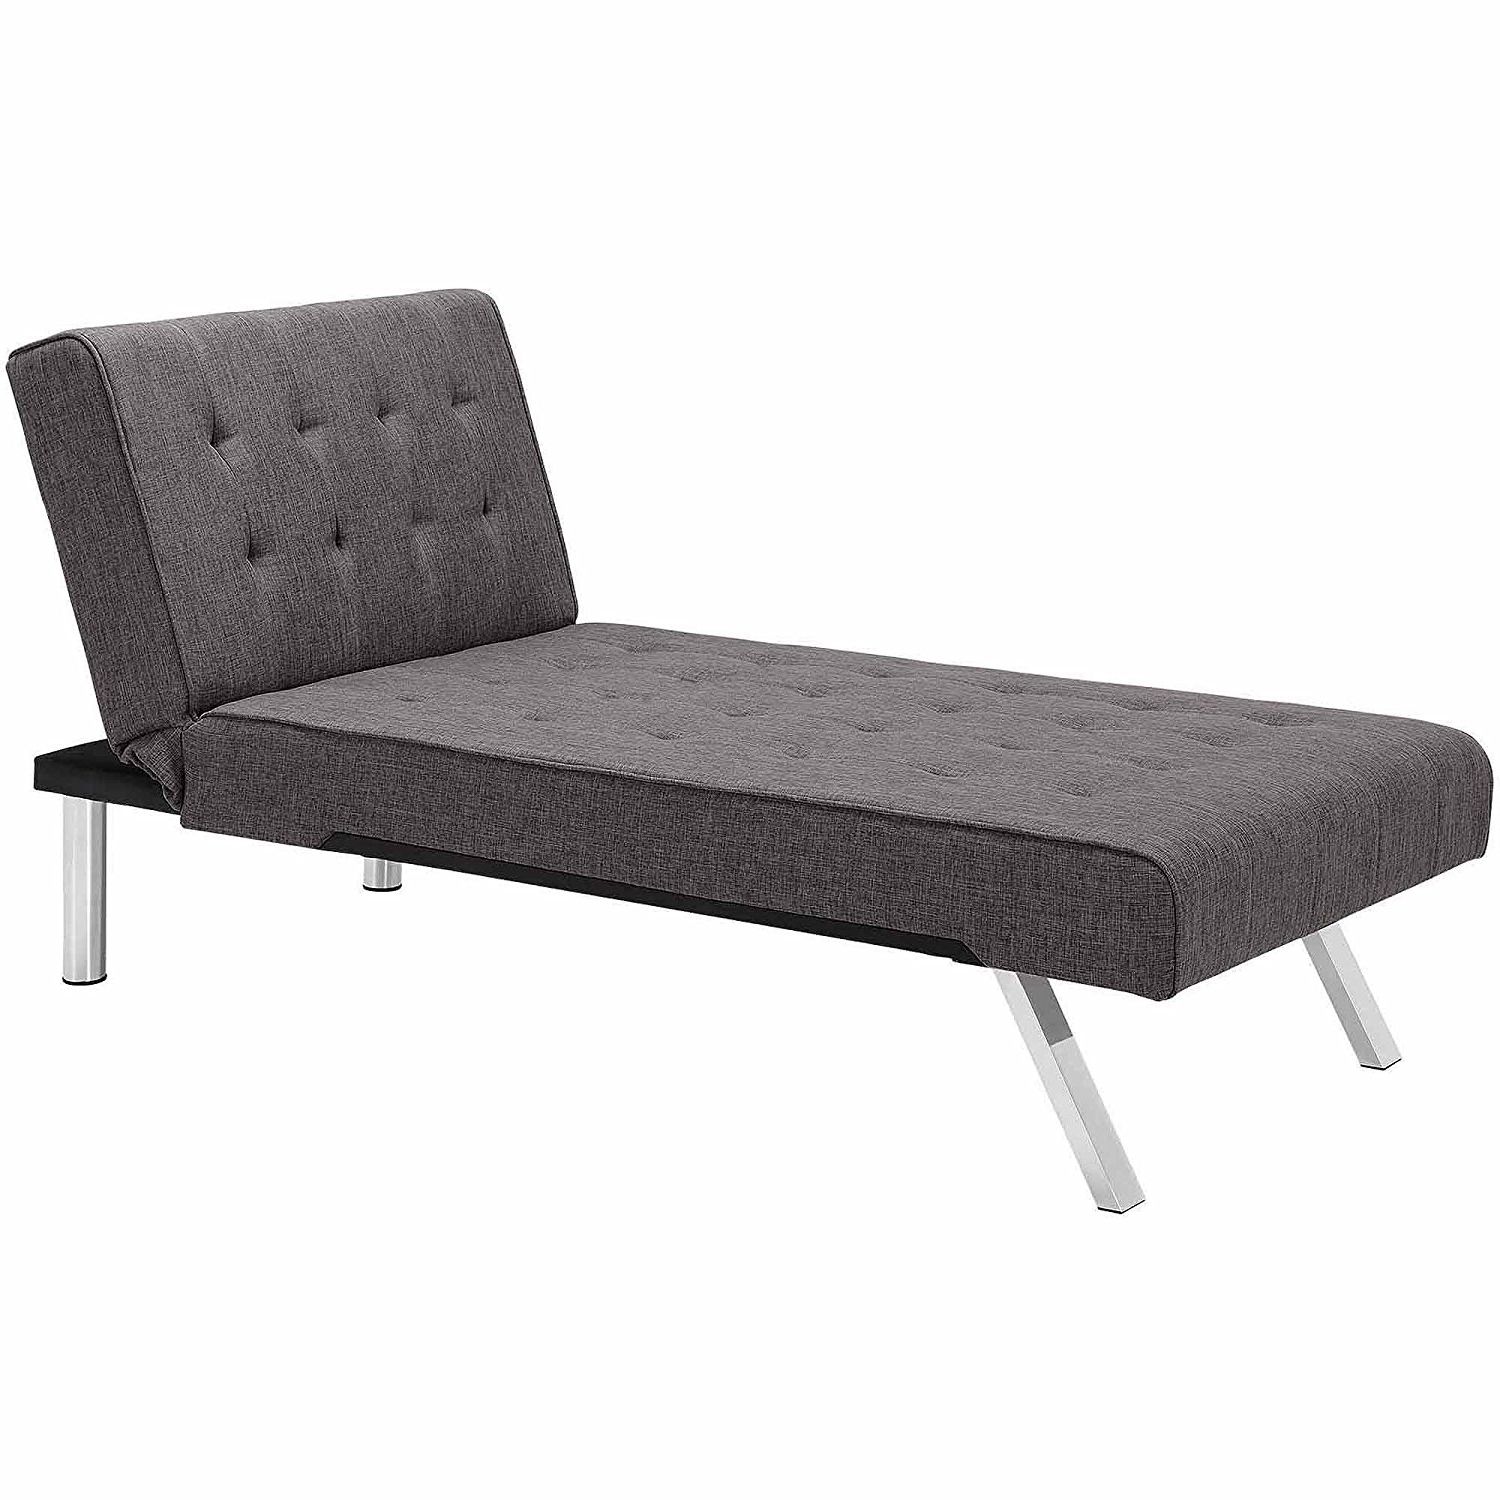 Most Popular Emily Futon Chaise Loungers With Amazon: Emily Futon Chaise Lounger (gray): Kitchen & Dining (View 1 of 15)